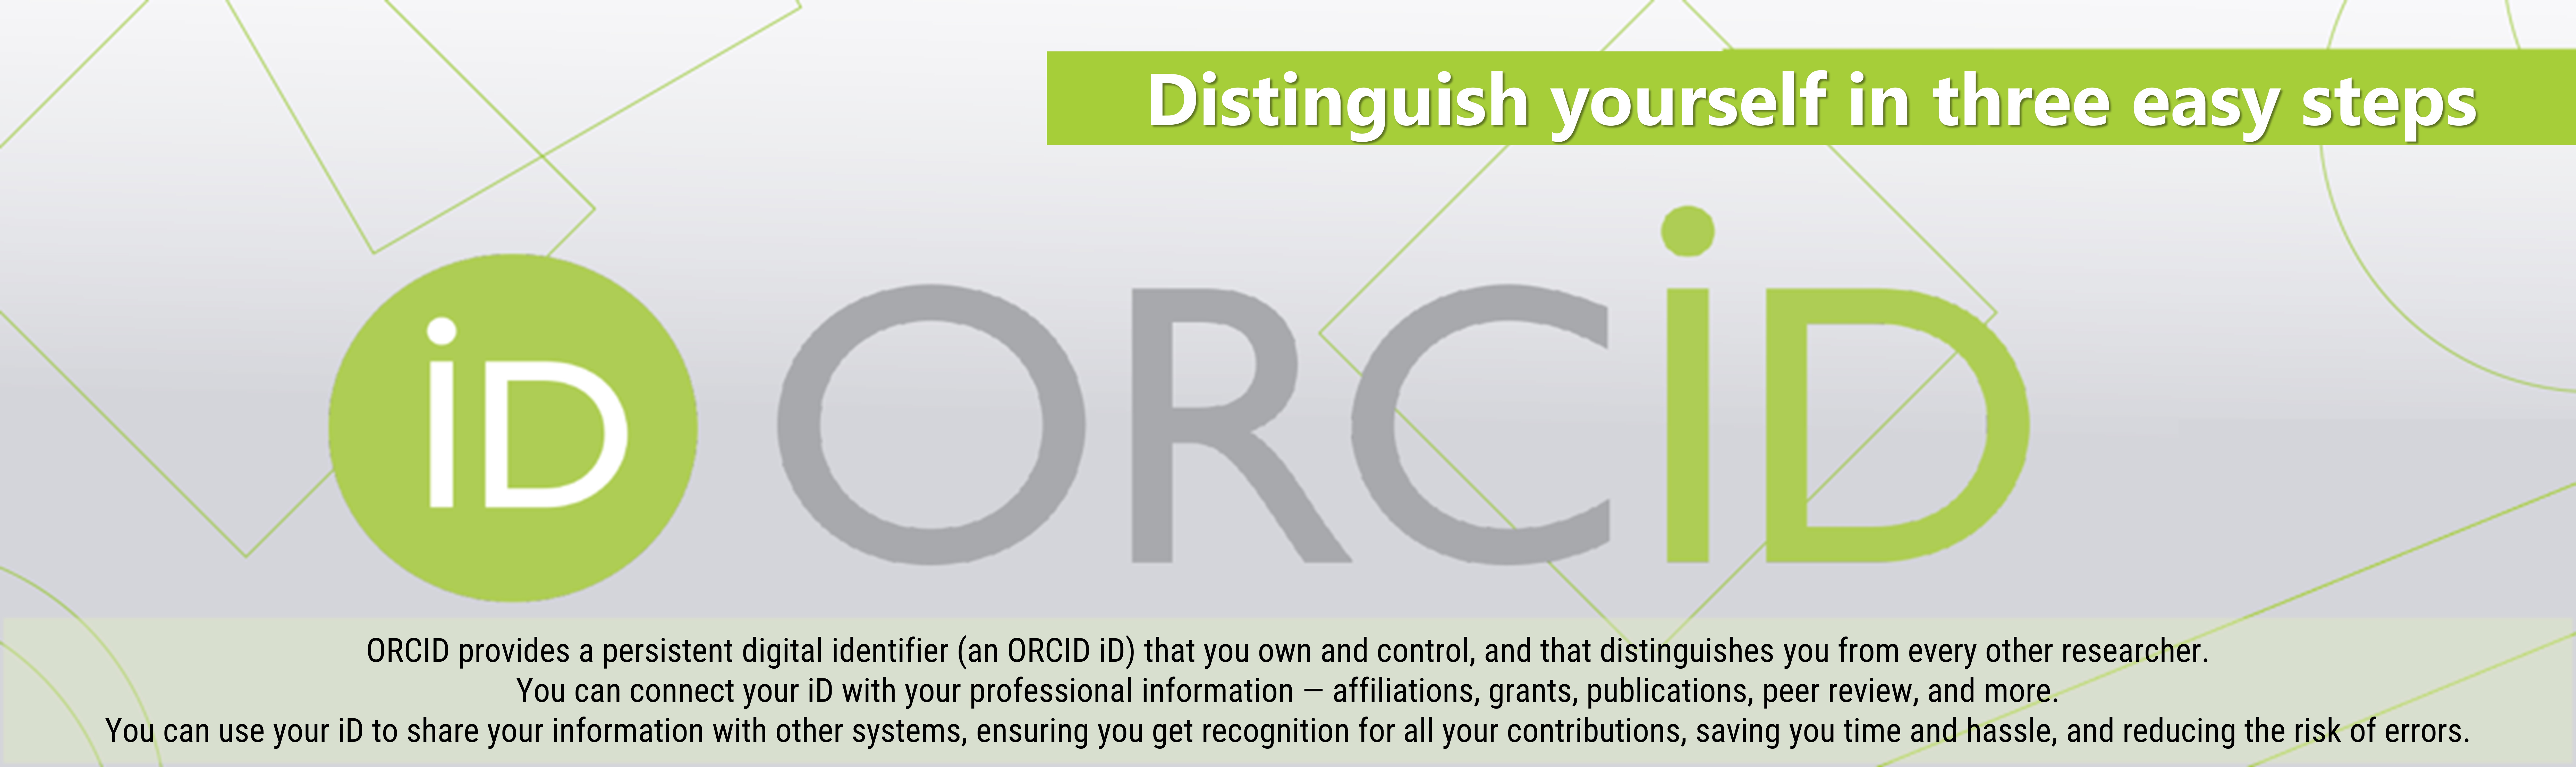 Register your ORCID id